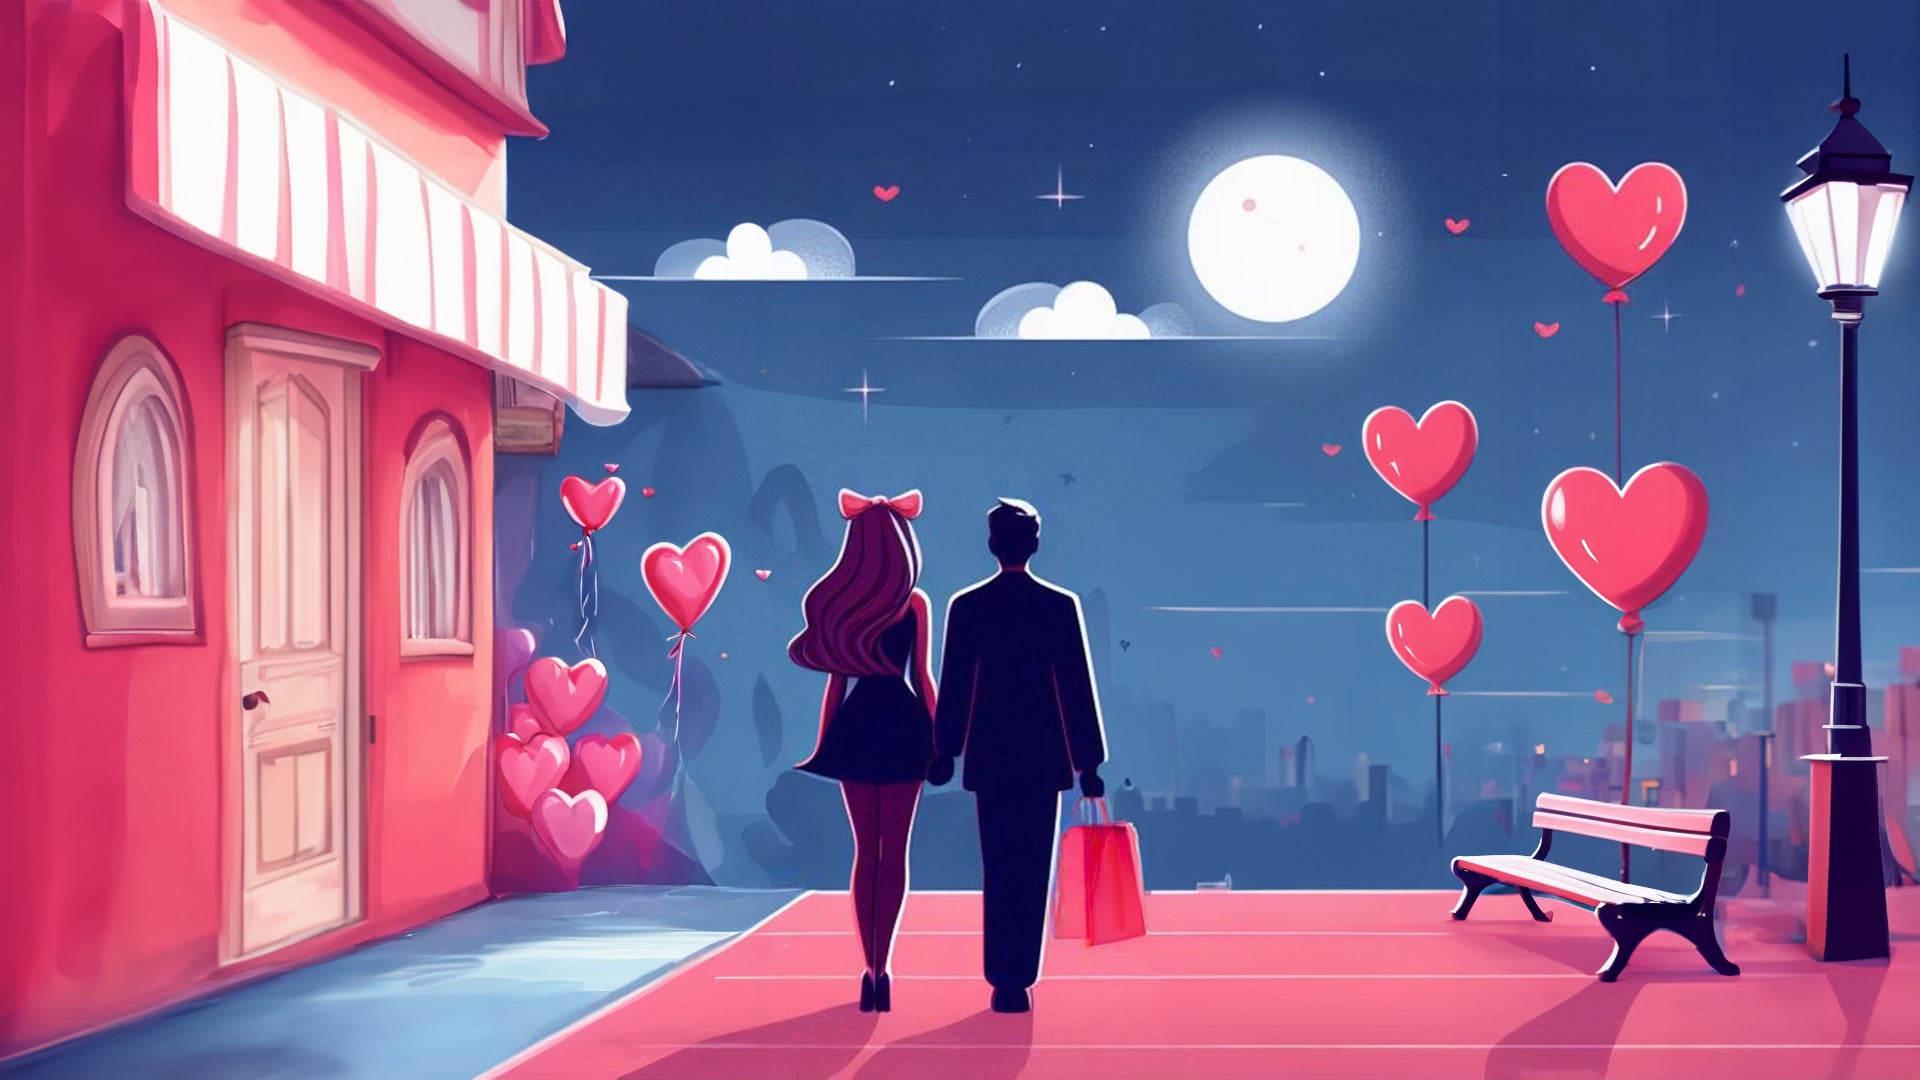 An affectionate couple returns home, surrounded by a romantic ambiance. They carry shopping bags, hinting at the joy of shared experiences and the delight of new purchases in the warm glow of their home.